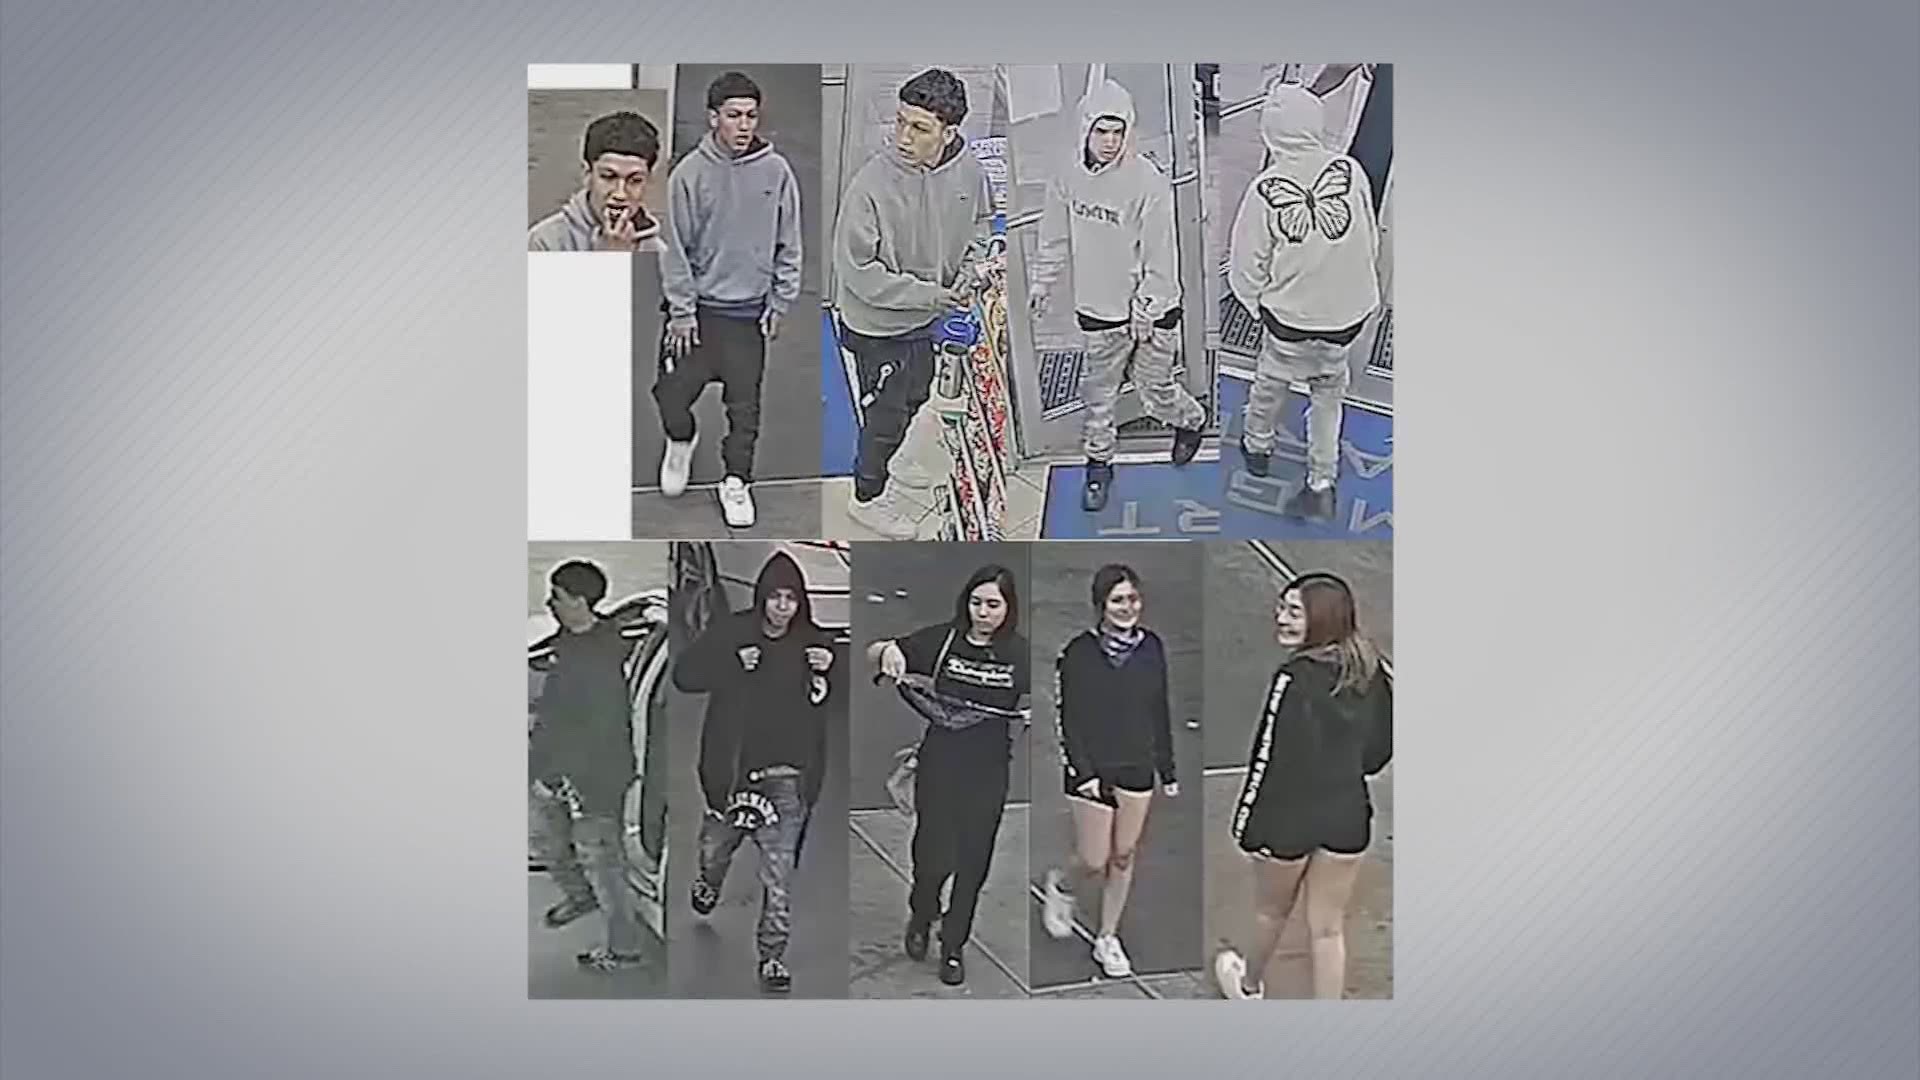 Houston police are searching for five suspects who are accused of robbing and assaulting a man at a Gulfton convenience store last month.